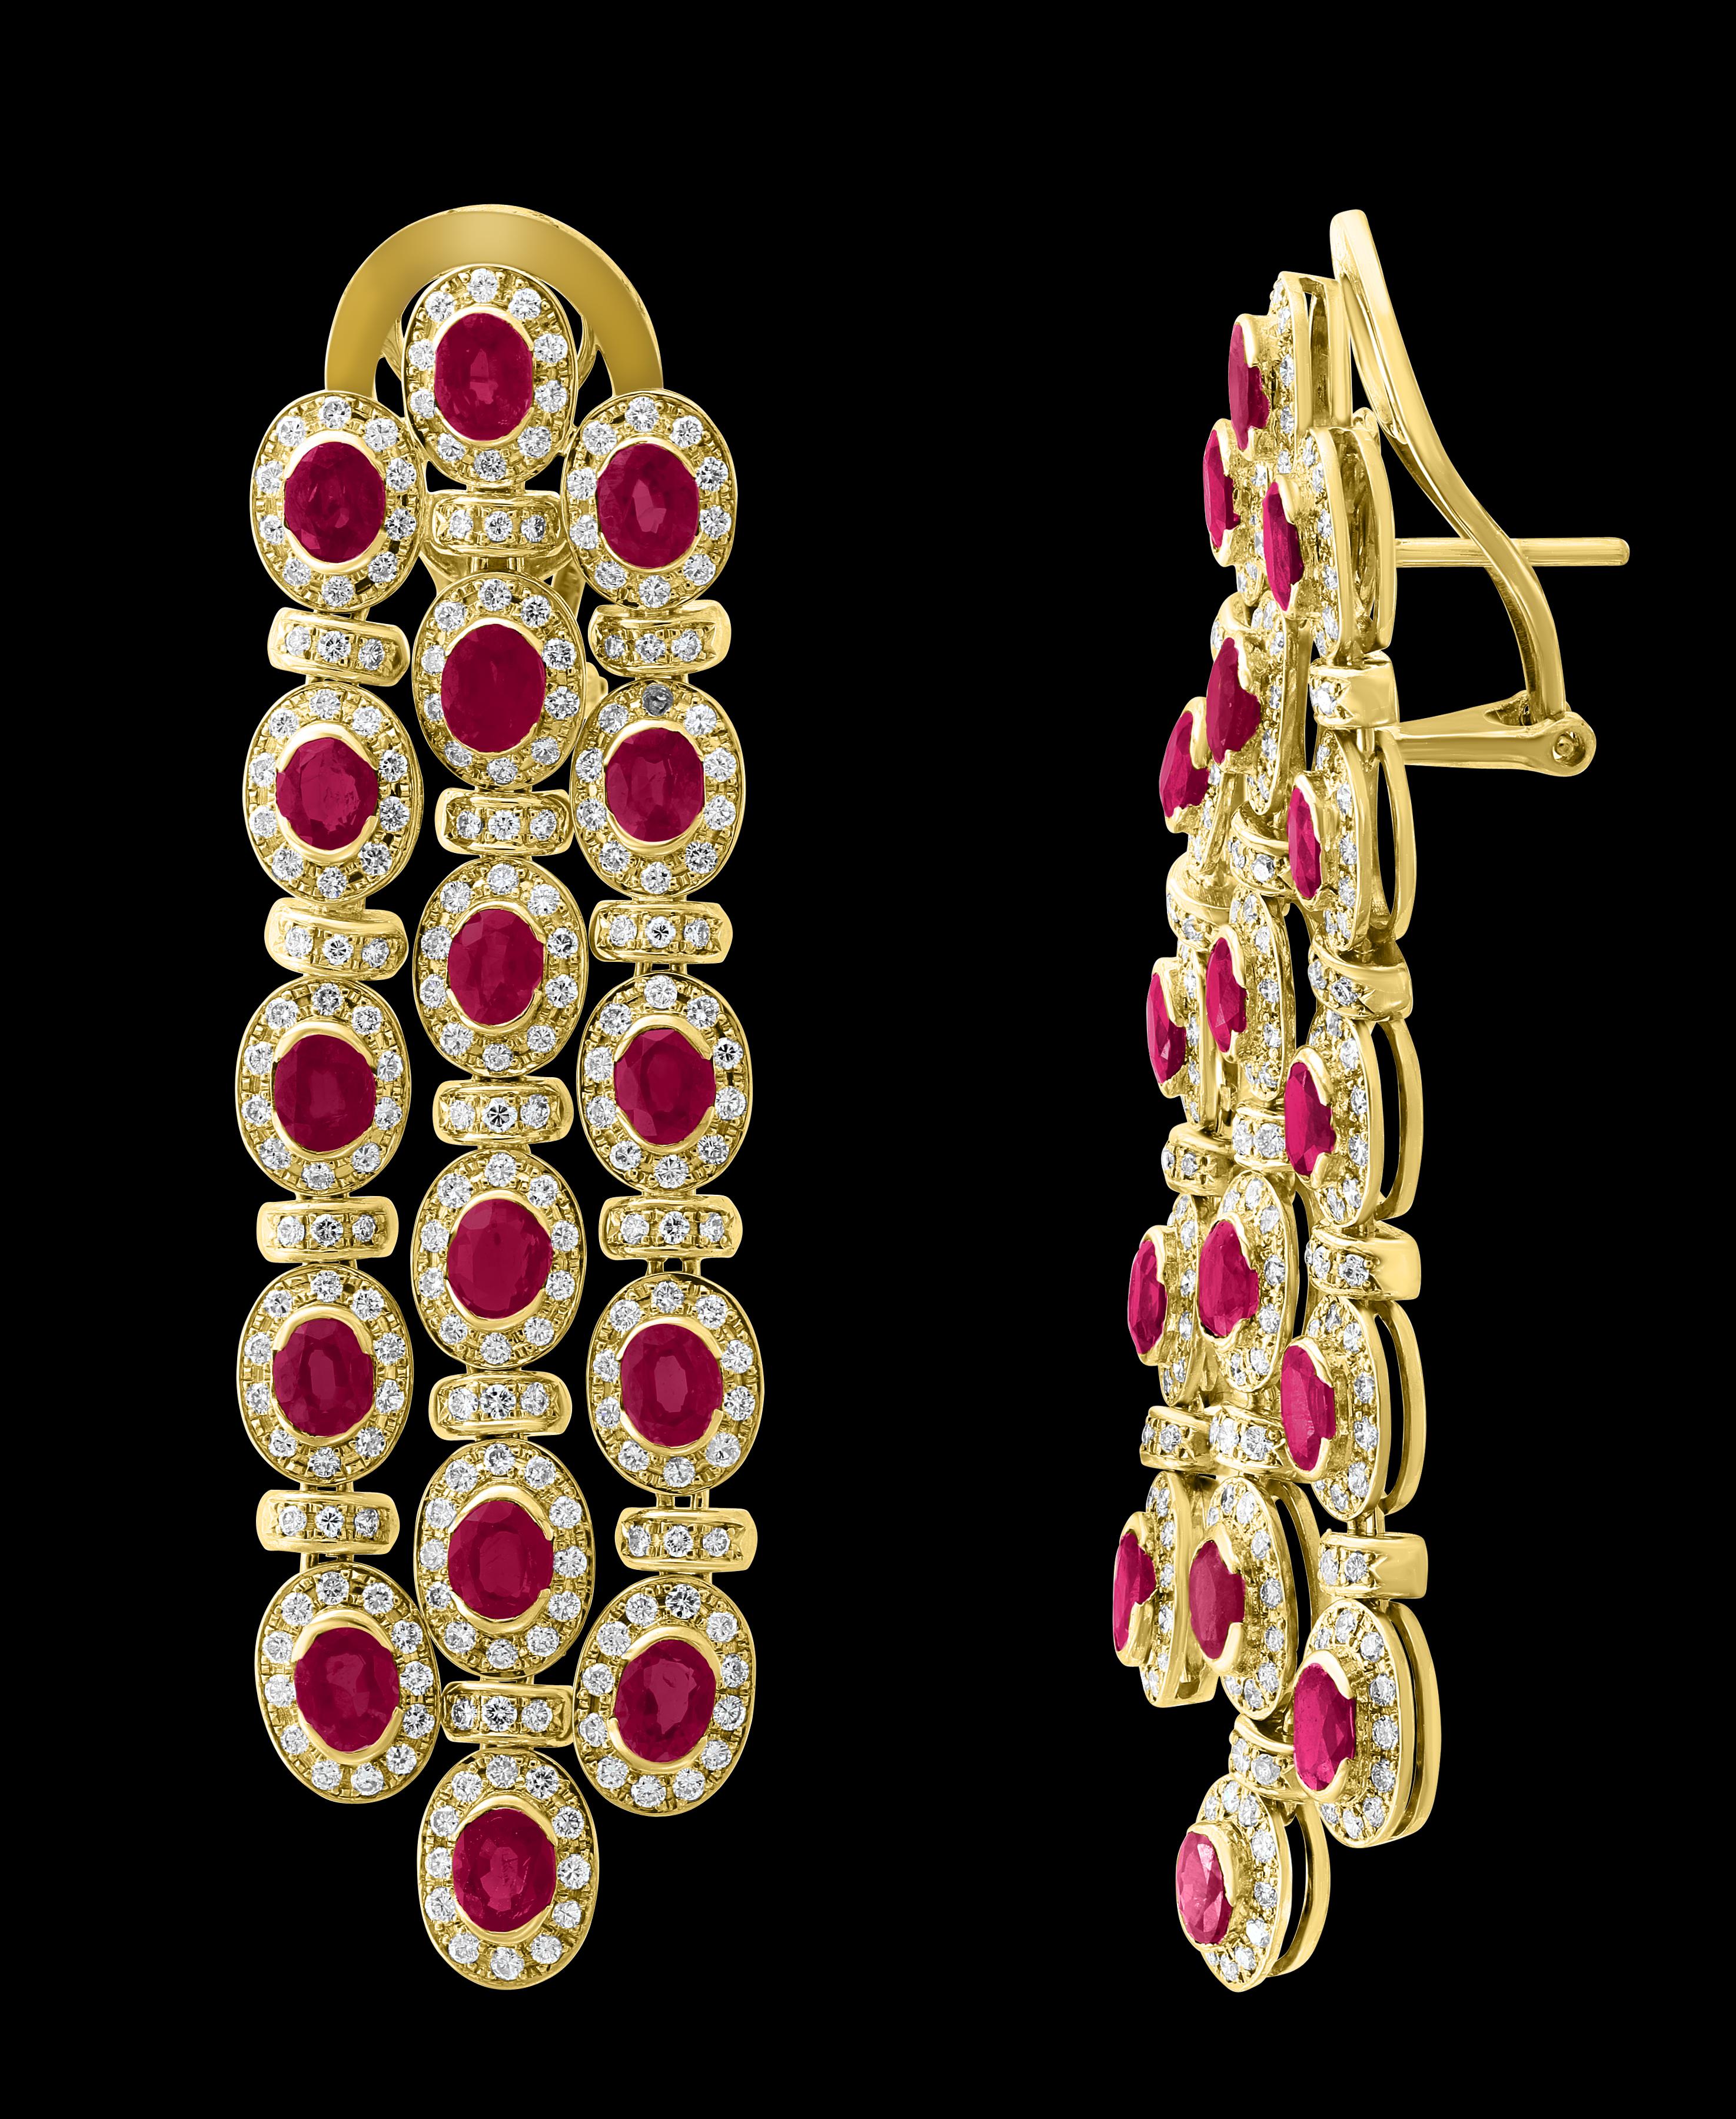 Oval Cut 16 Ct Natural Burma Ruby & 10 Ct  Diamond Hanging/Drop Earrings 18 Kt Gold 35 Gm For Sale